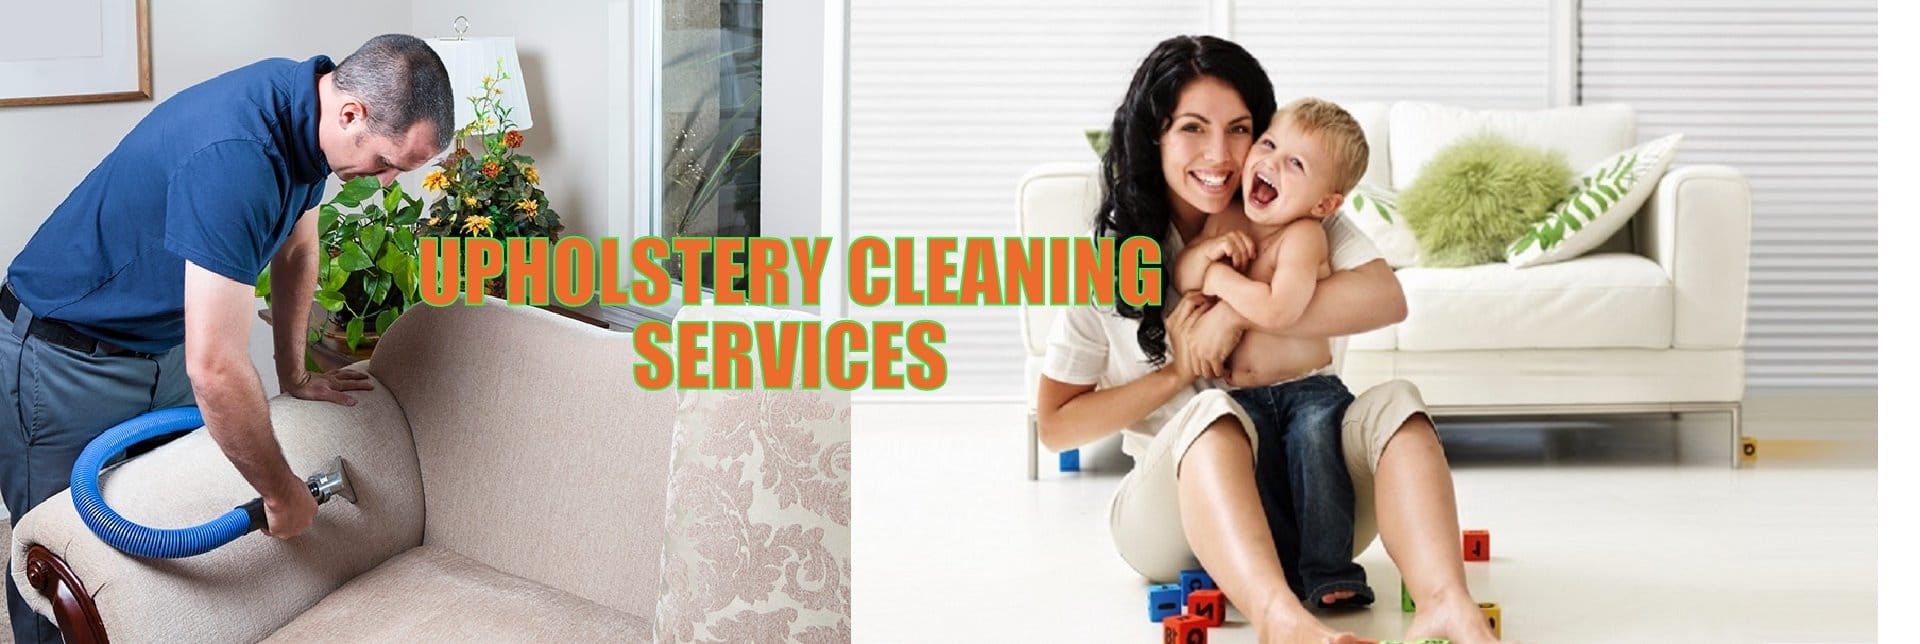 UPHOLSTERY CLEANING OTTAWA